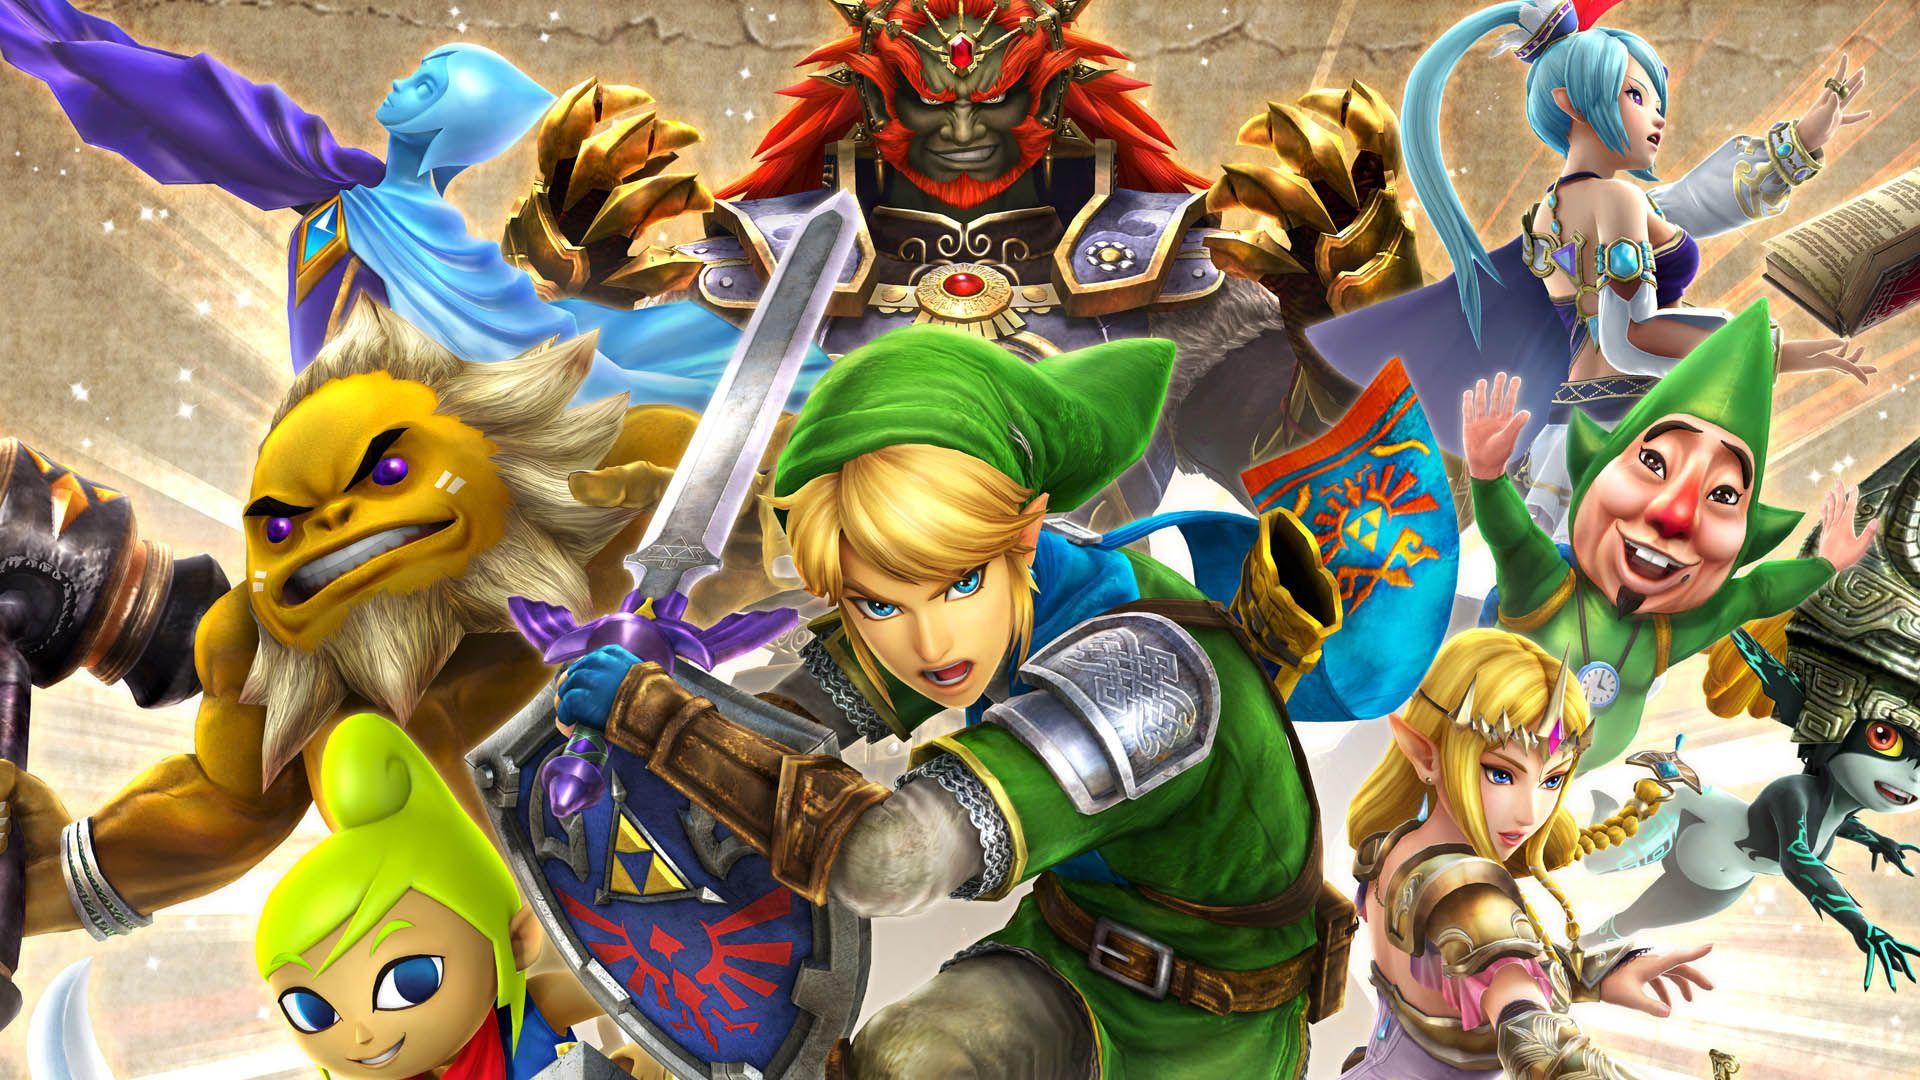 Video) Hyrule Warriors: Definitive Edition extended trailer